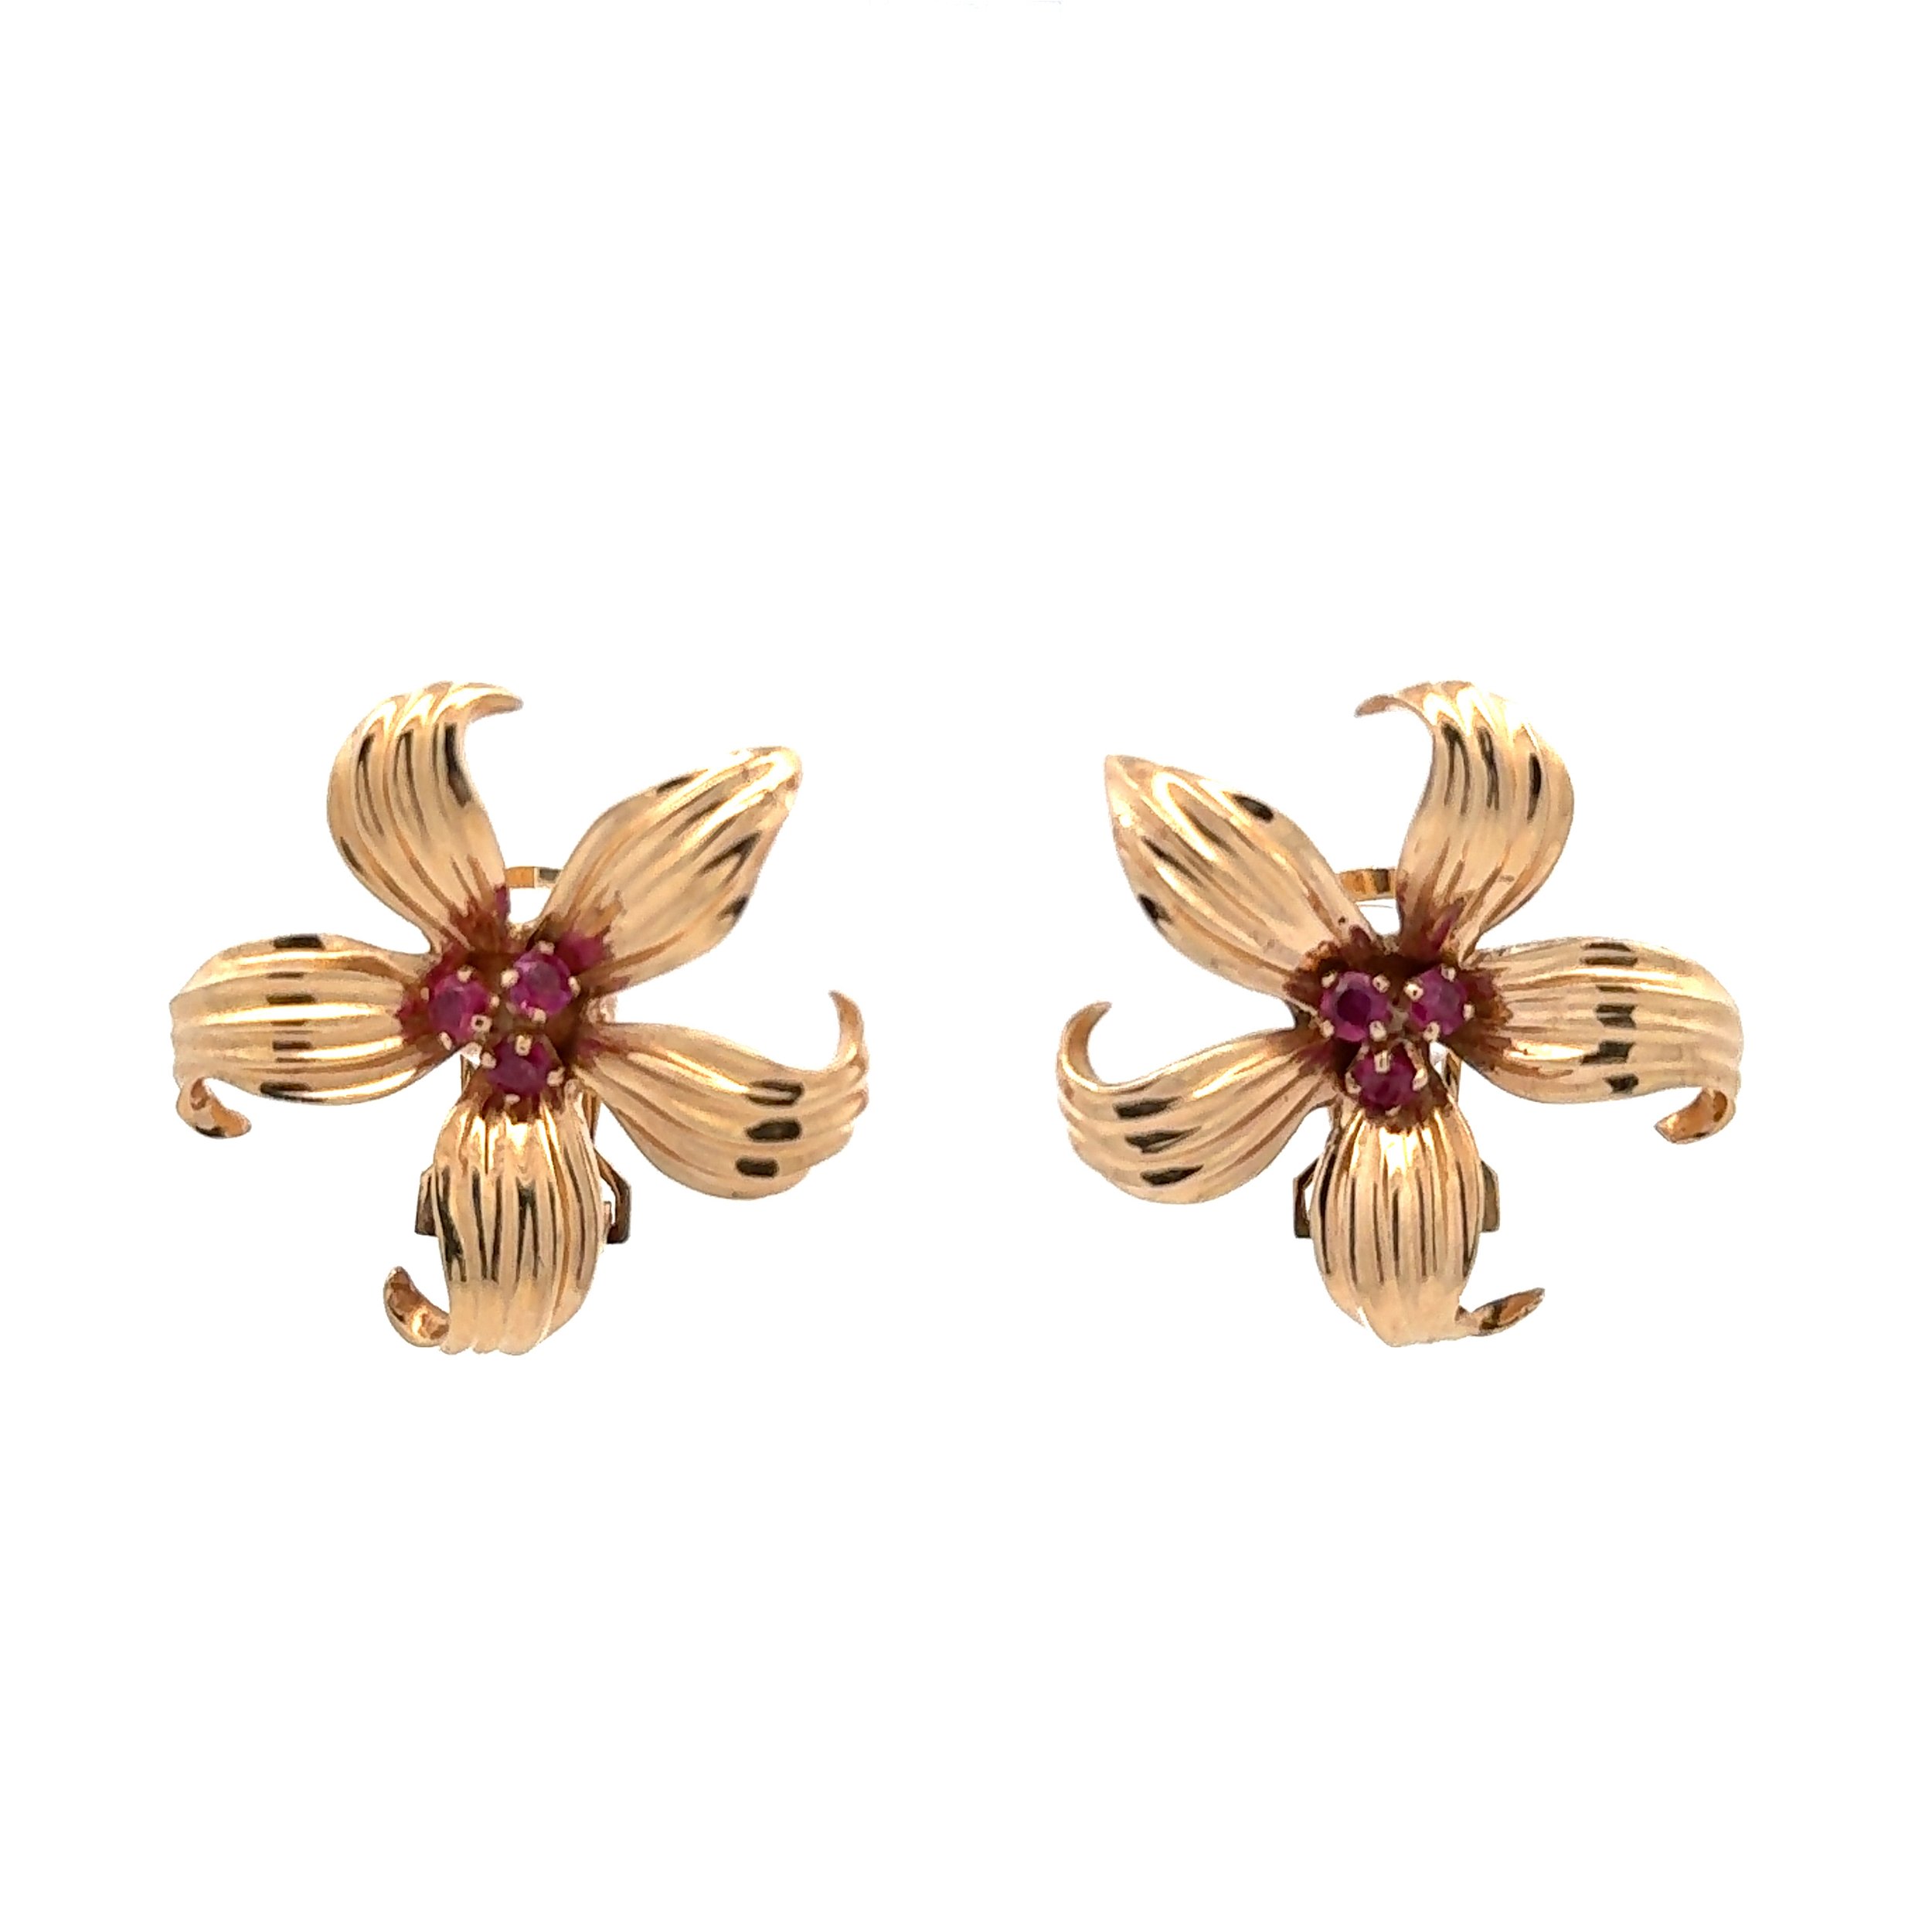 14K YG Retro Flower Earring with .30tcw Round Ruby French Clip Earrings 12.2g, 1.2"